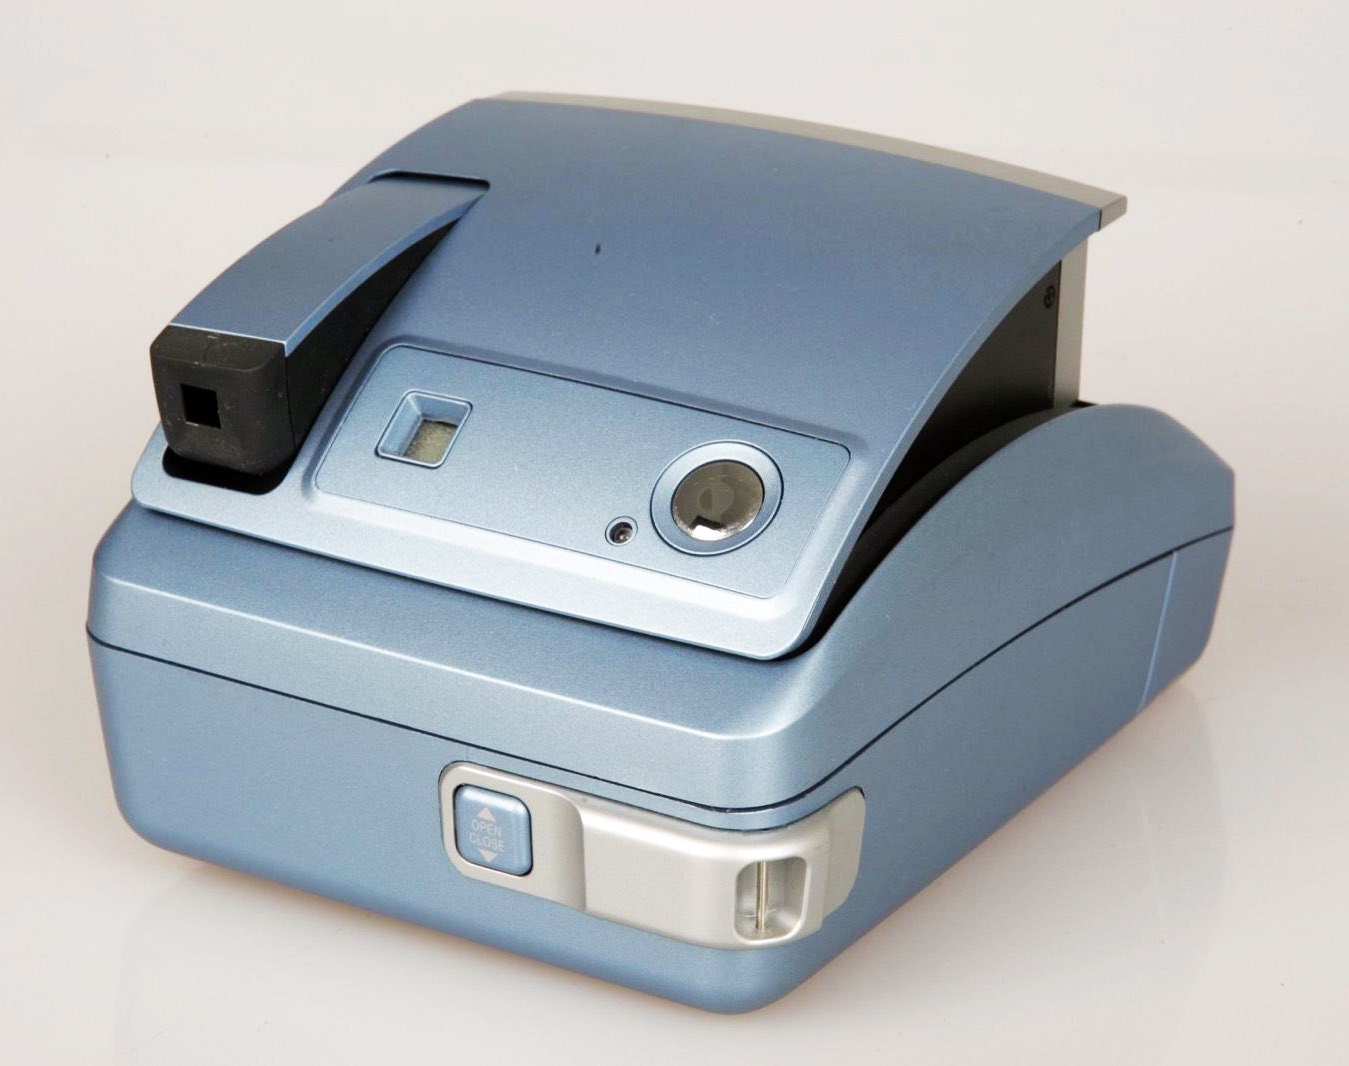 Polaroid One 600 Slate Blue Instant Film Camera Tested and Works